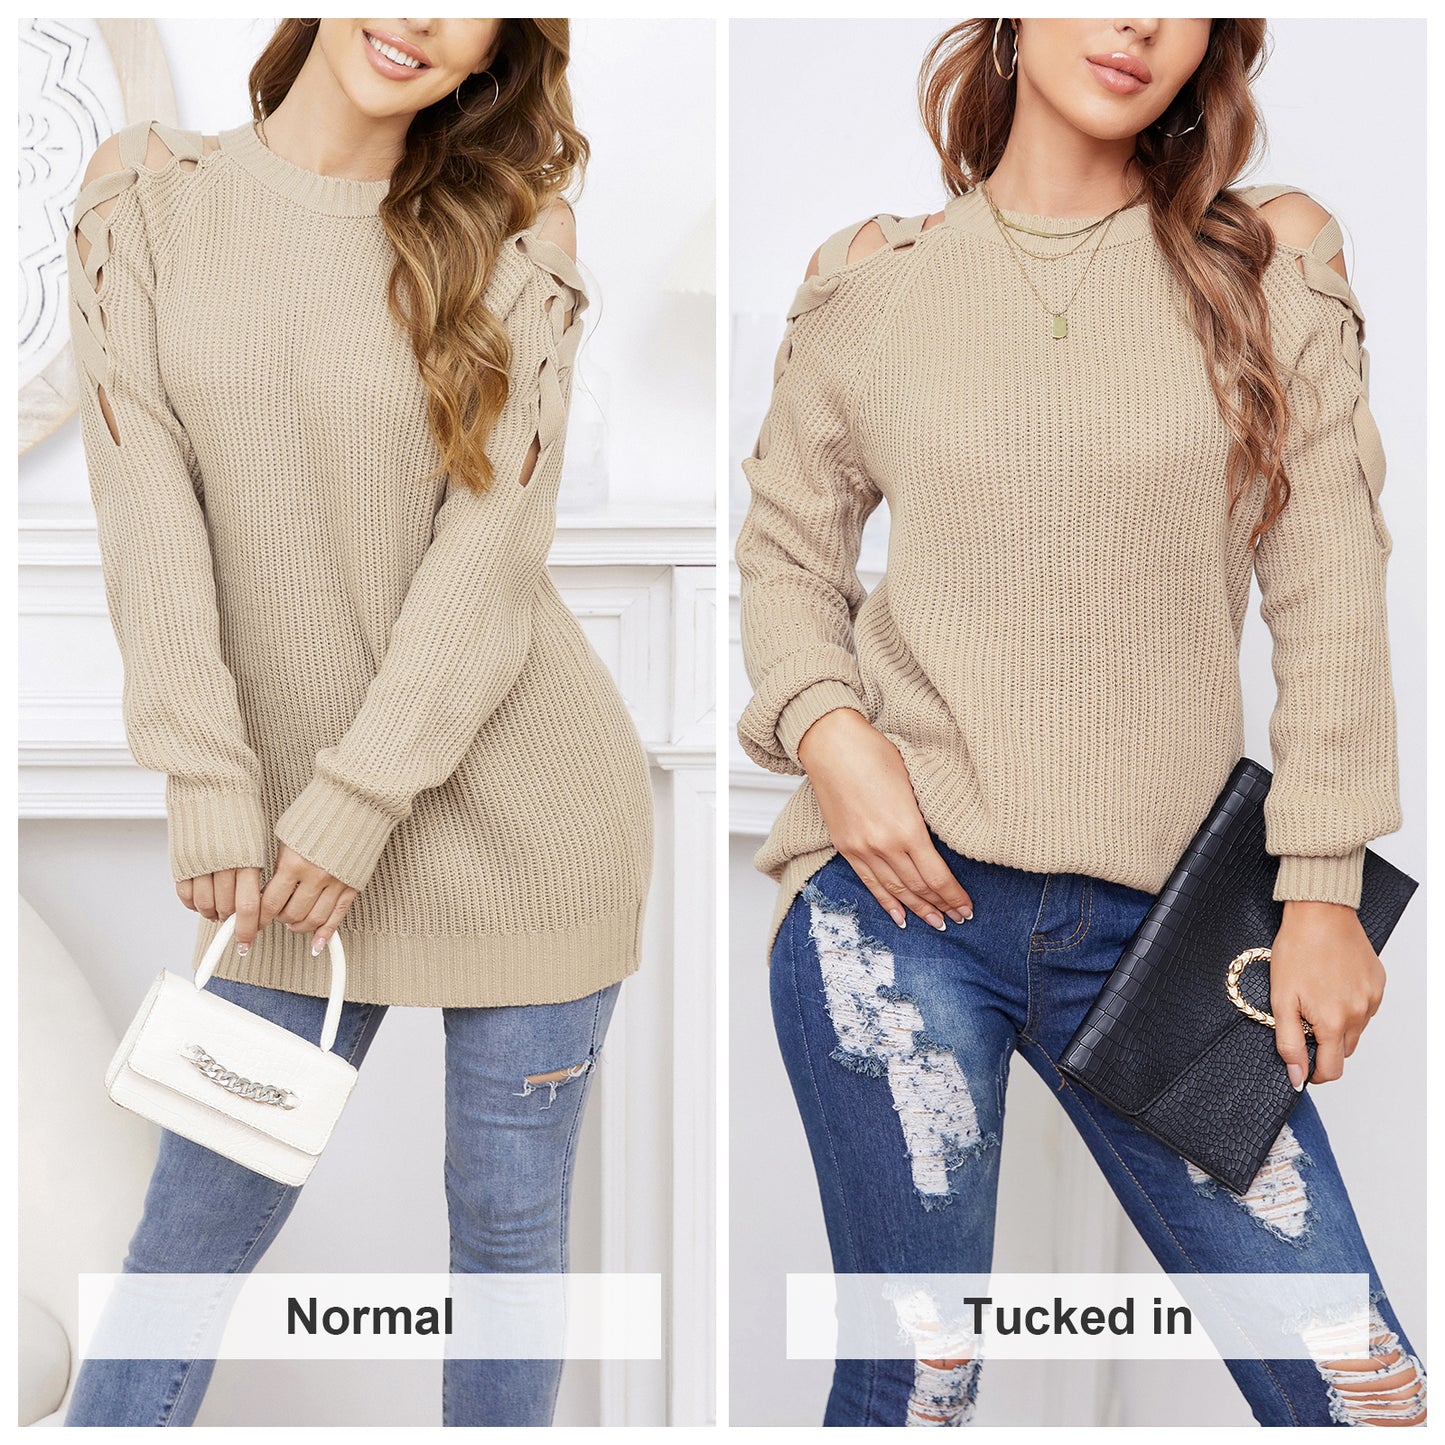 EXLURA Women’s Criss Cross Long Oversized Sweater Crew Neck Cold Shoulder Long Sleeve Pullover Sweater Knit Casual Trendy Tops